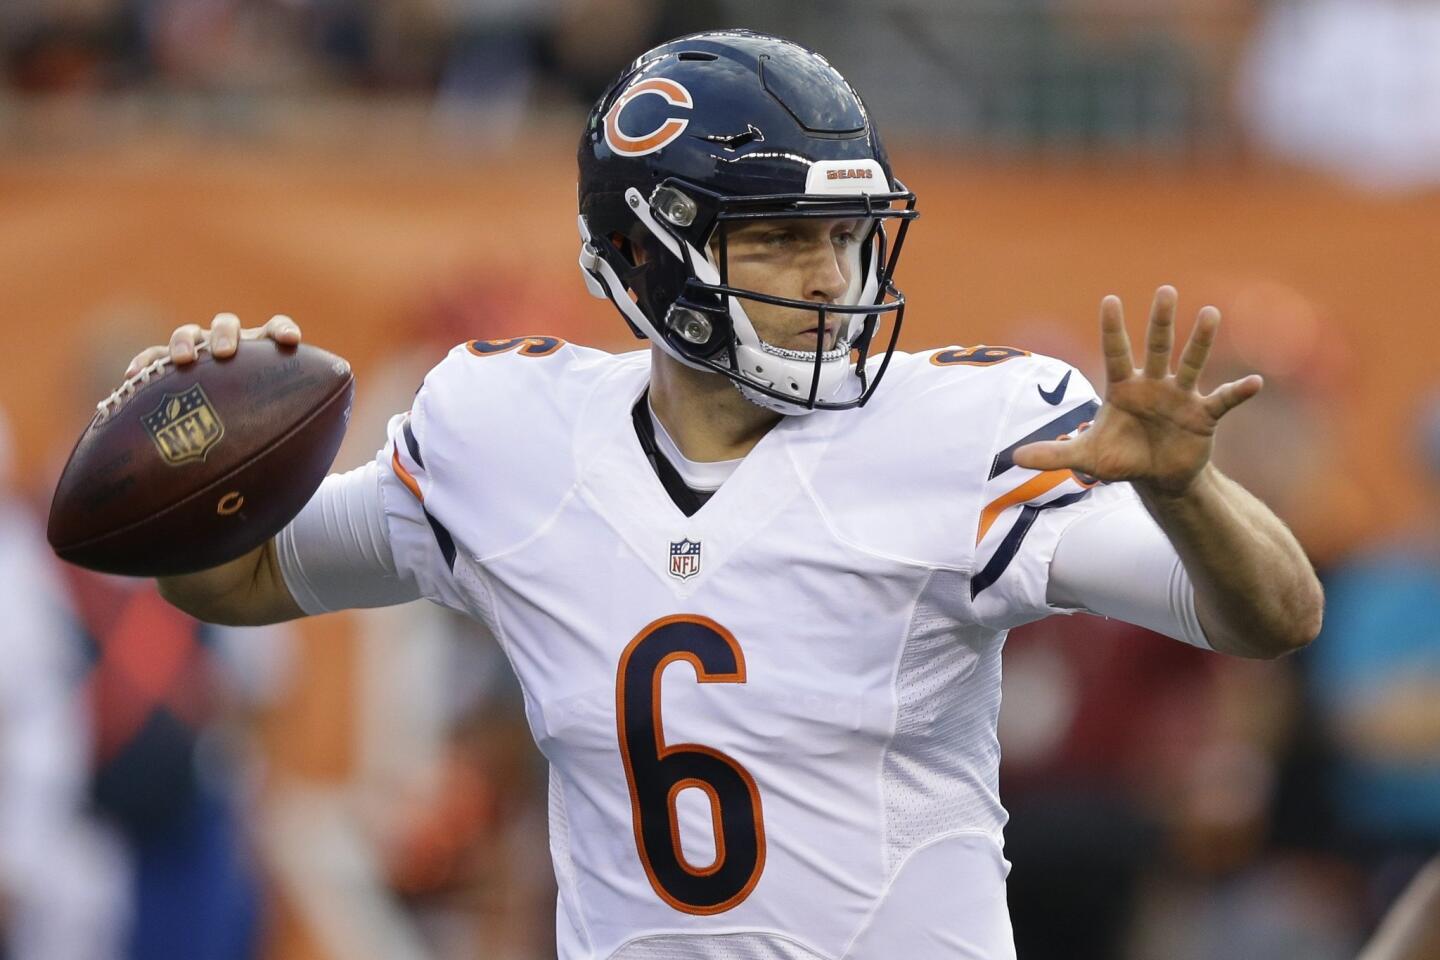 Bears quarterback Jay Cutler looks to pass in the first half.